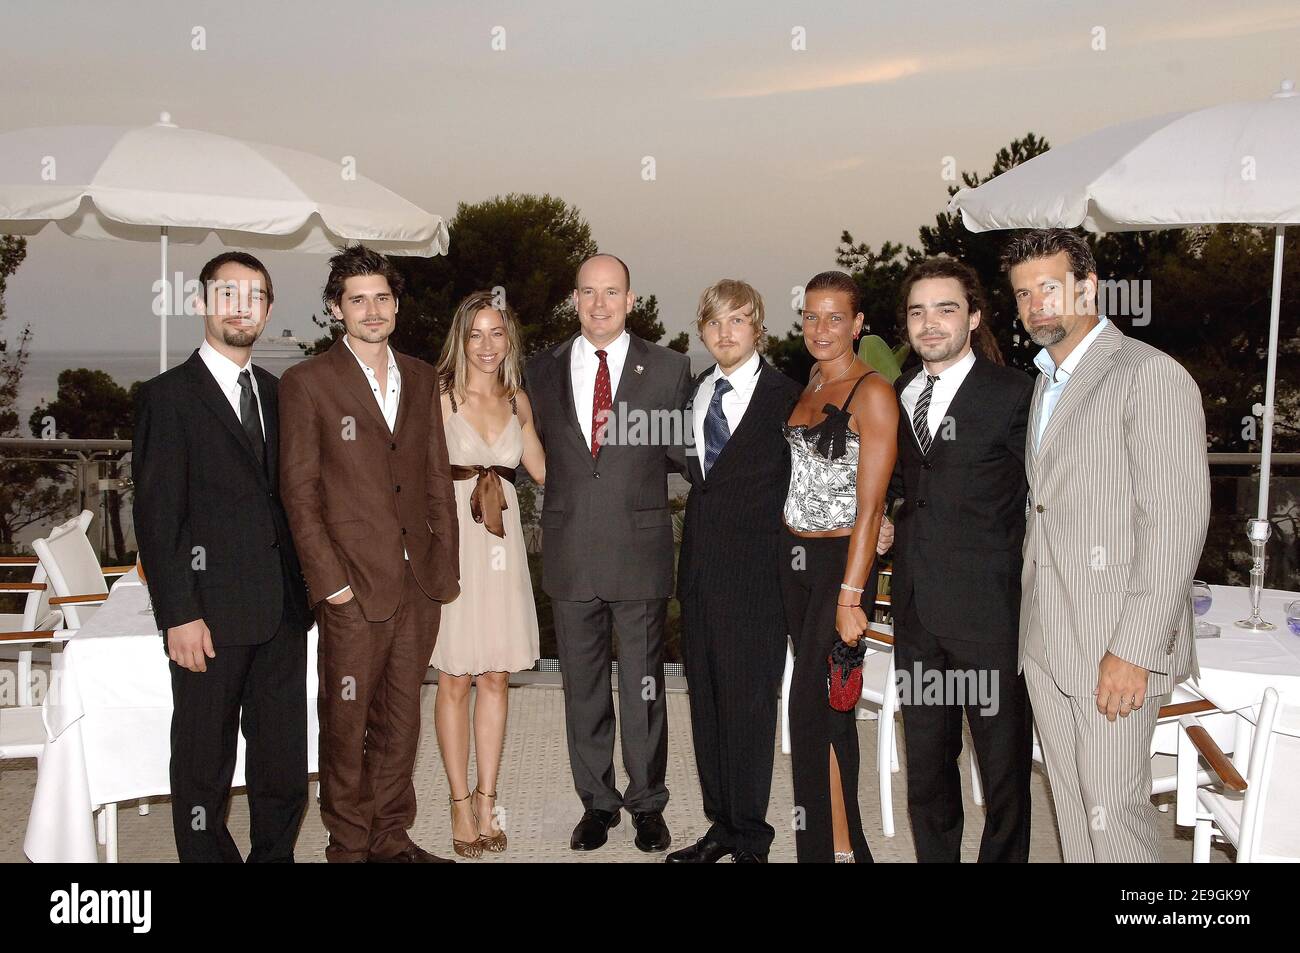 Princess Stephanie of Monaco and Prince Albert II along with Kyo members, Roch Voisine and his wife Myriam attend the 'Figh Aids Monaco' party held at the Sporting in Monaco, on July 21, 2006. Photo by Pool SBM/ABACAPRESS.COM Stock Photo